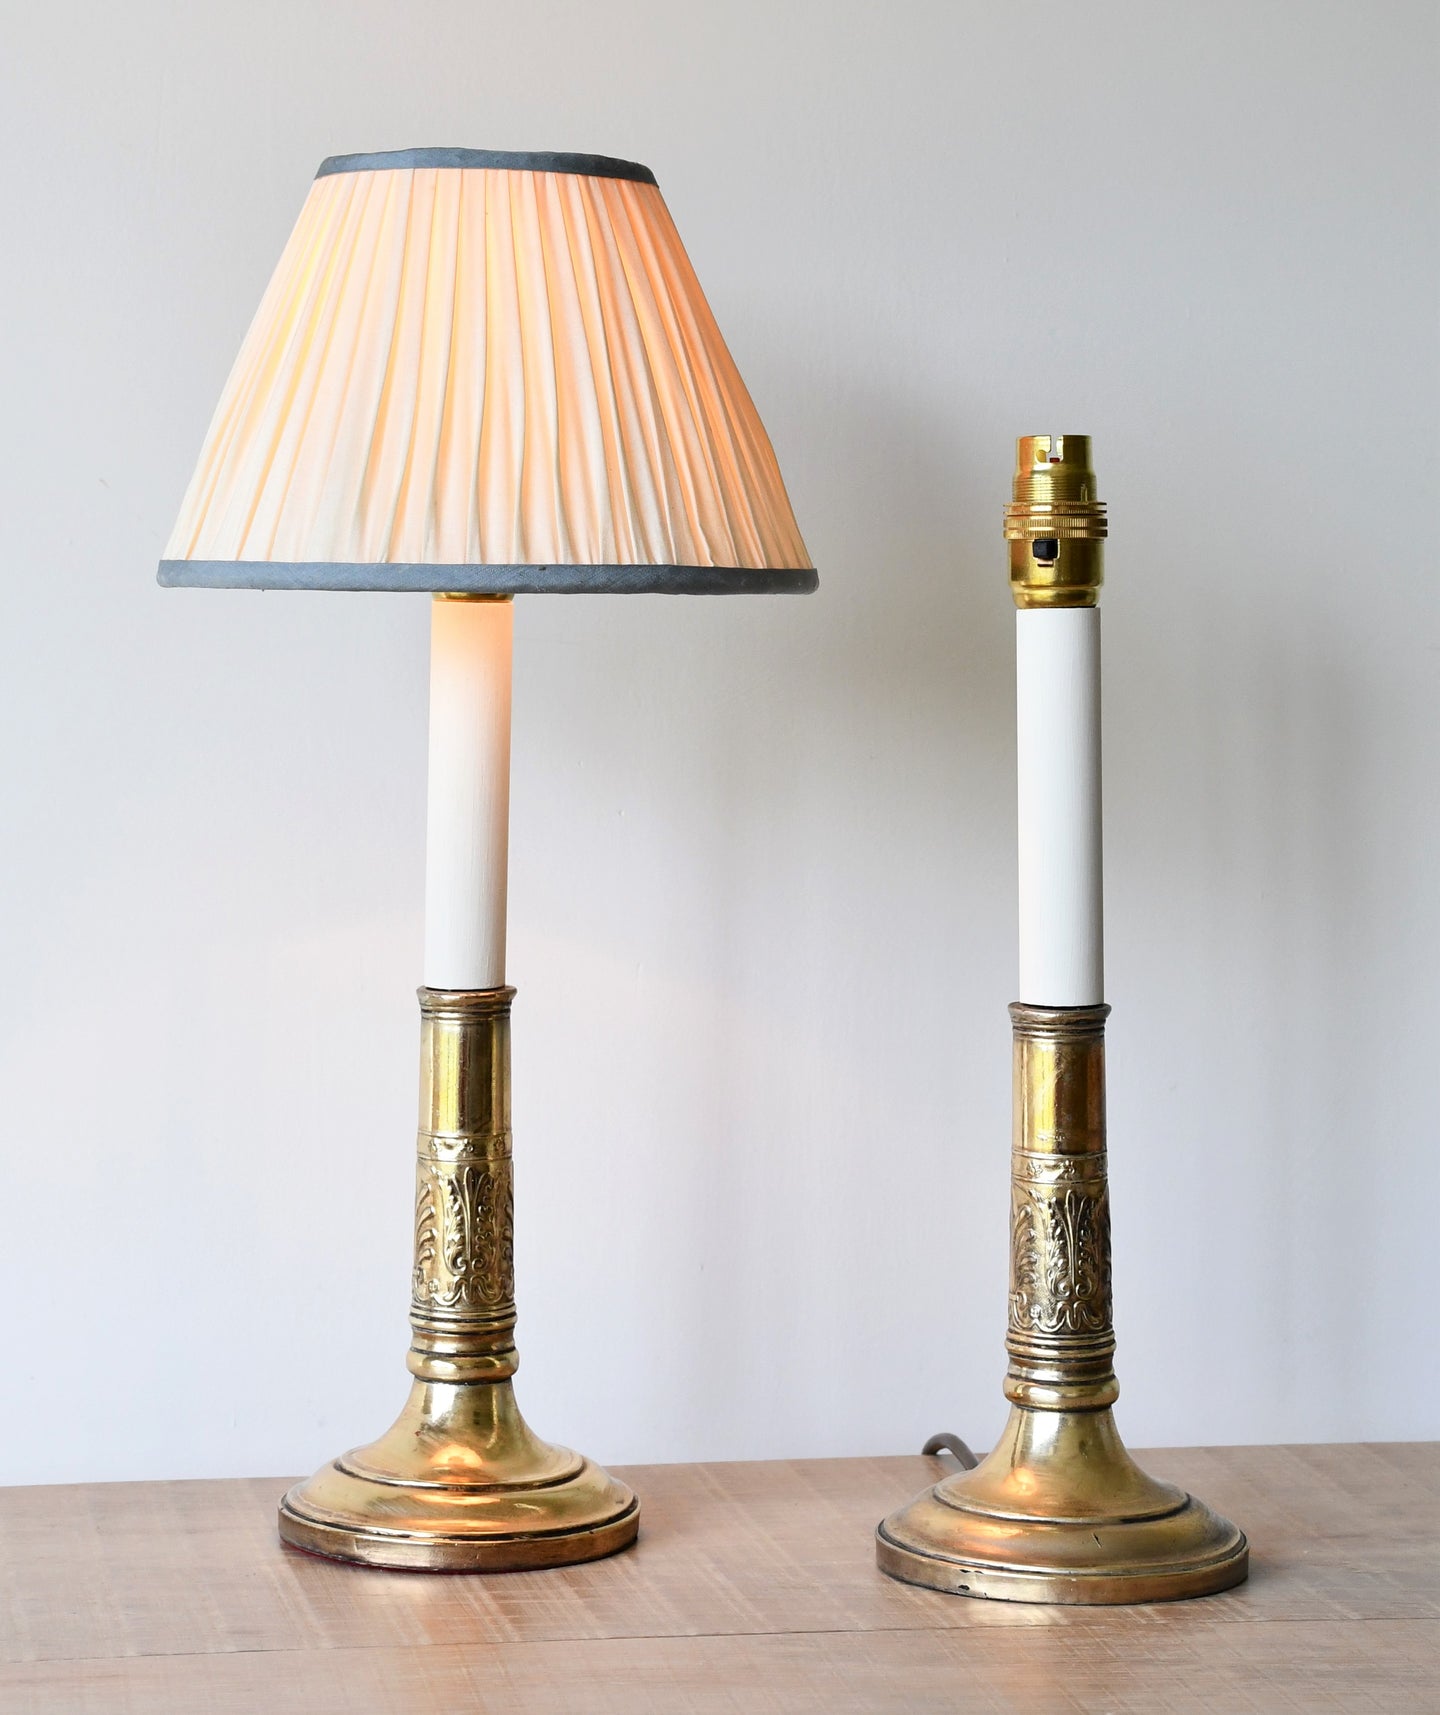 A Pair of Early 20th Century - Candlestick Table Lamps